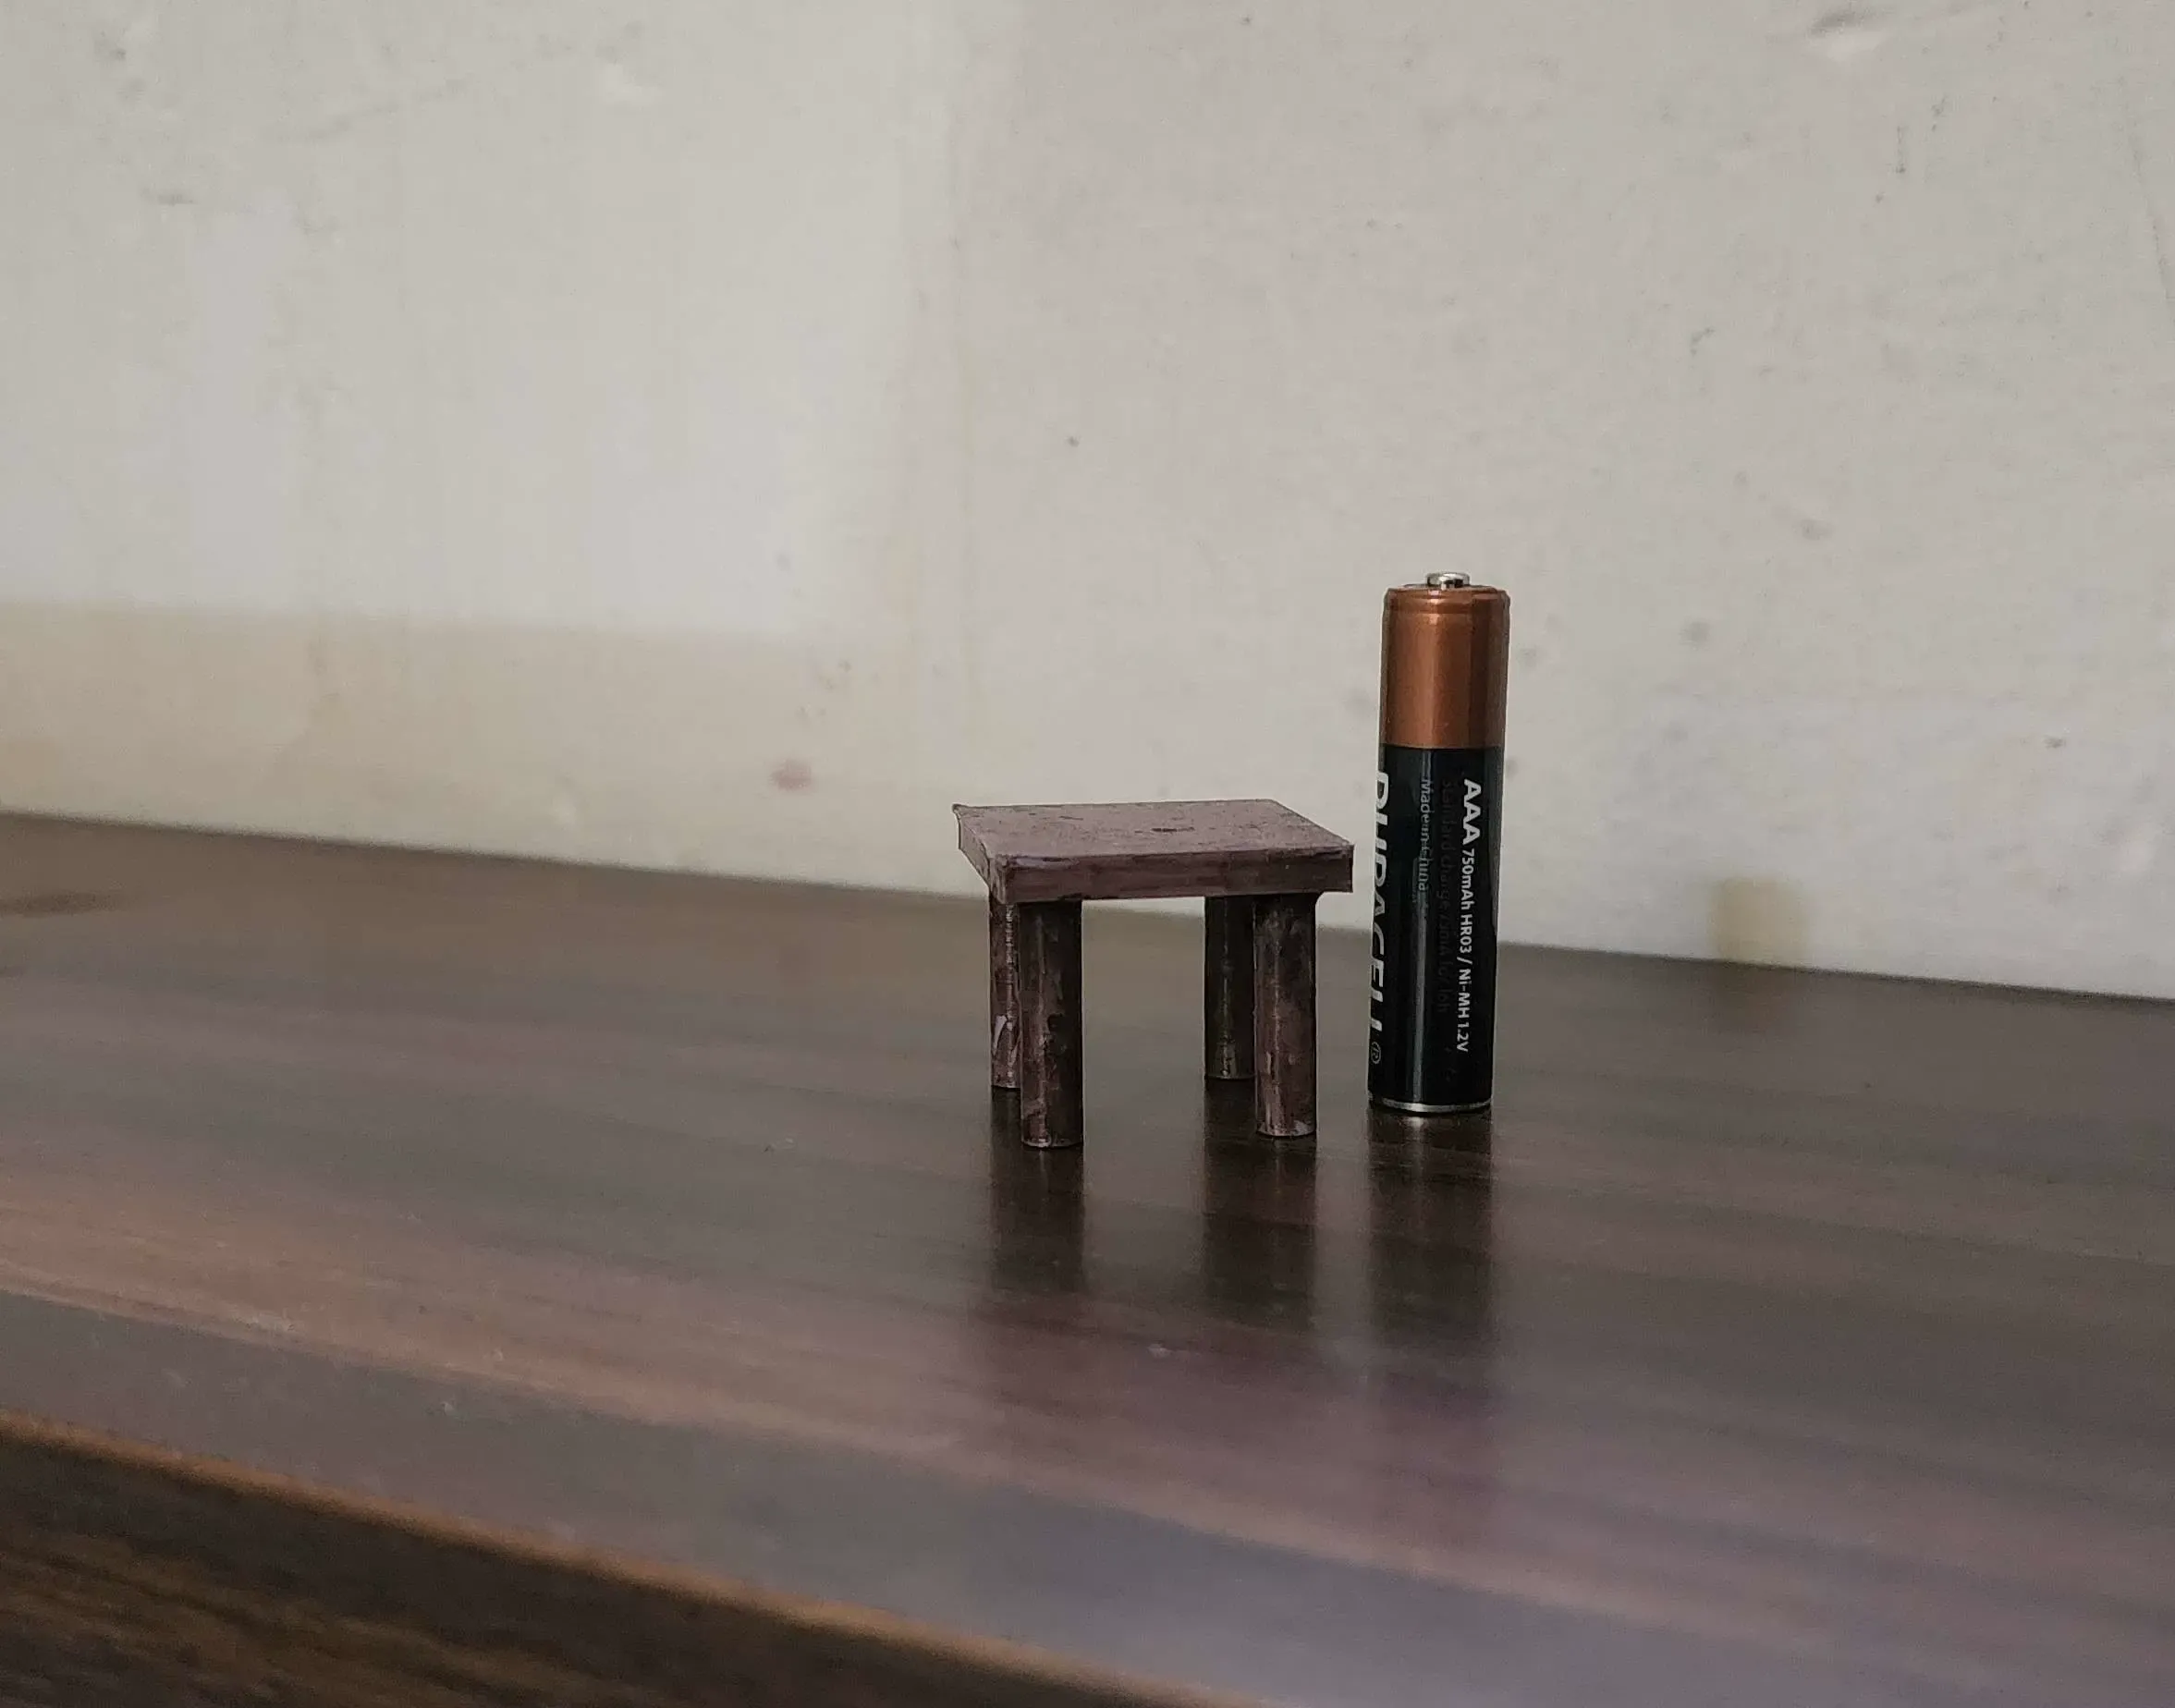 small table or mini table